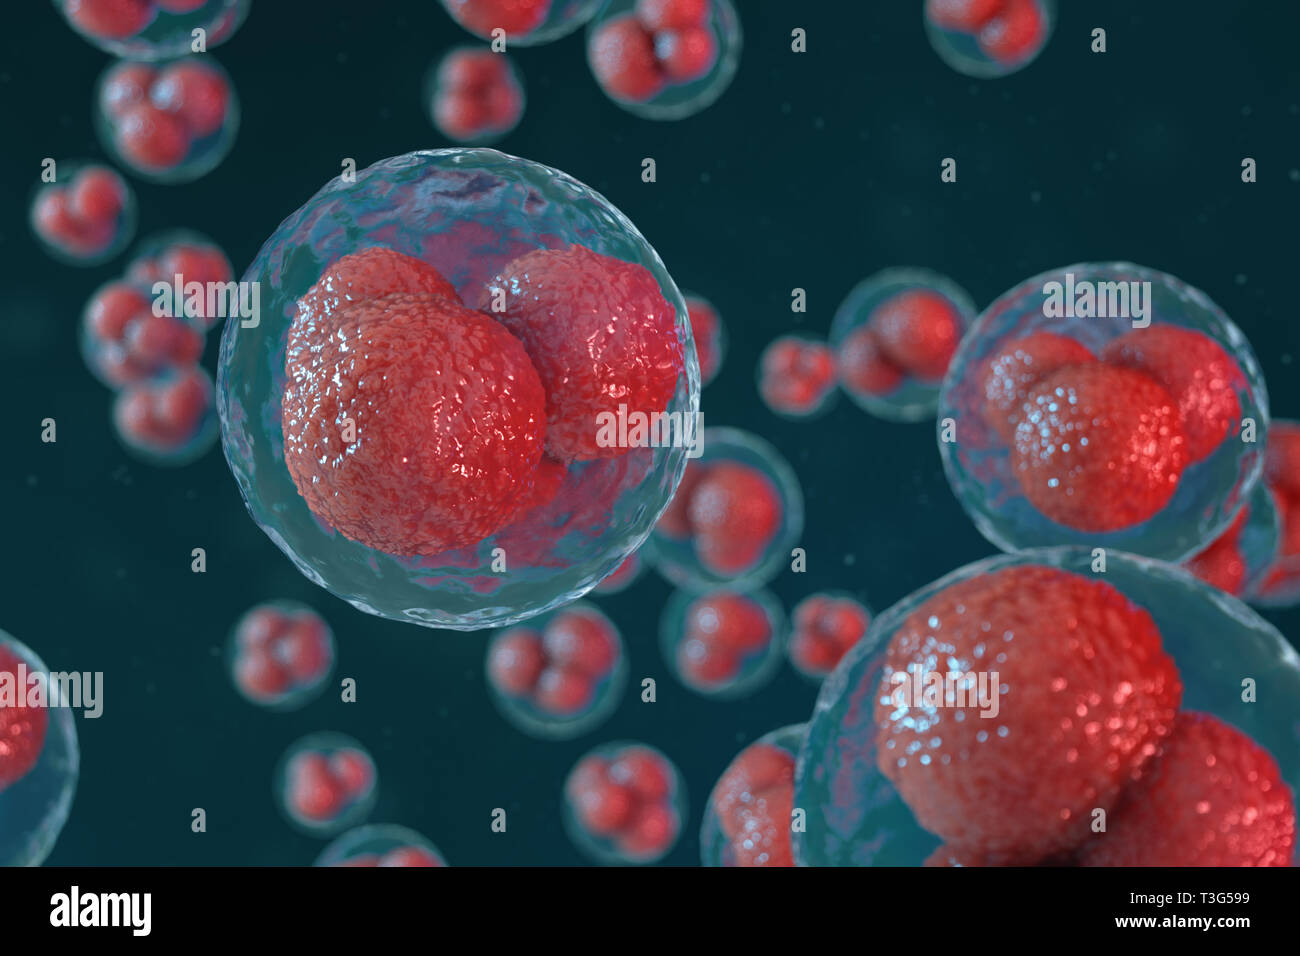 3D illustration egg cells embryo. Embryo cells with red nucleus in center. Human or animal egg cells. Medicine scientific concept. Development living  Stock Photo